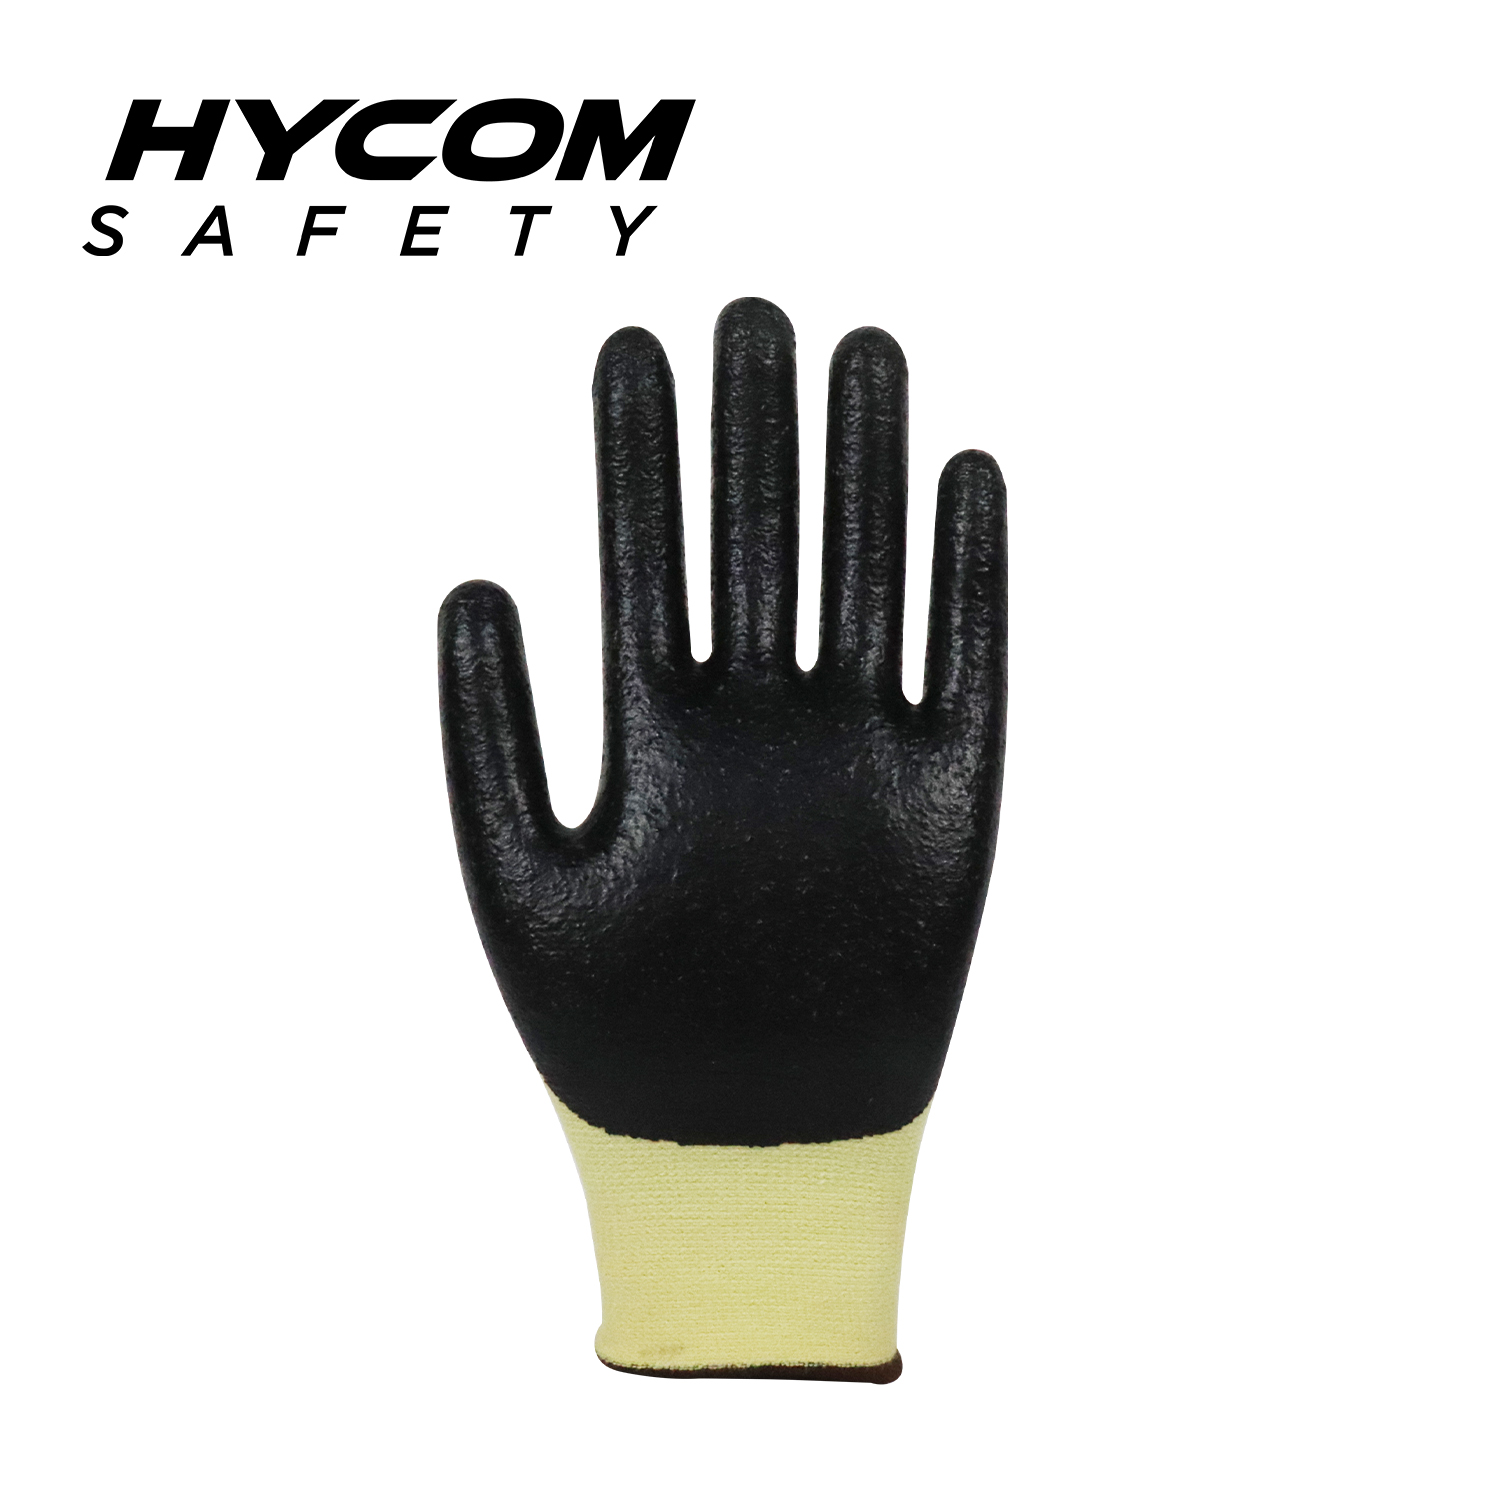 HYCOM 15G Versatile Industrial Gloves with Breathable Liner for Comfort And Dexterity Palm Foam Nitrile Coating PPE Glove